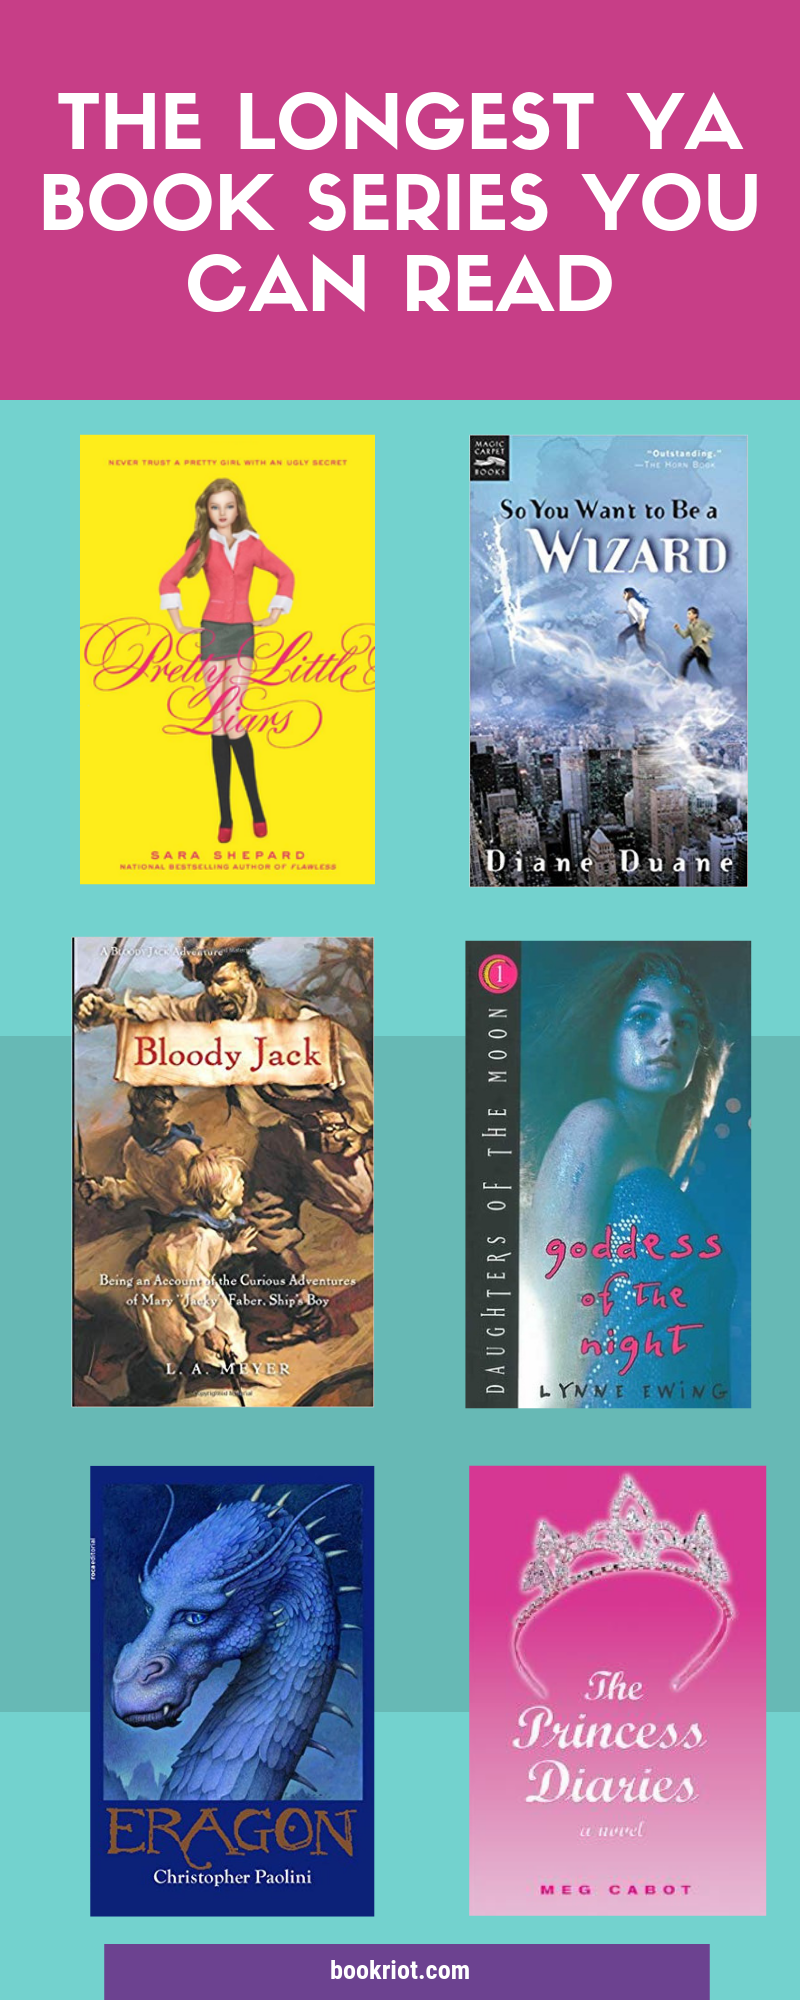 The longest YA book series you can read, both by number of volumes in the series and by number of pages in the series. book lists | YA books | YA book lists | Longest YA books | Longest YA book series | book series | long book series | long ya book series | #YALit | #YABoooks